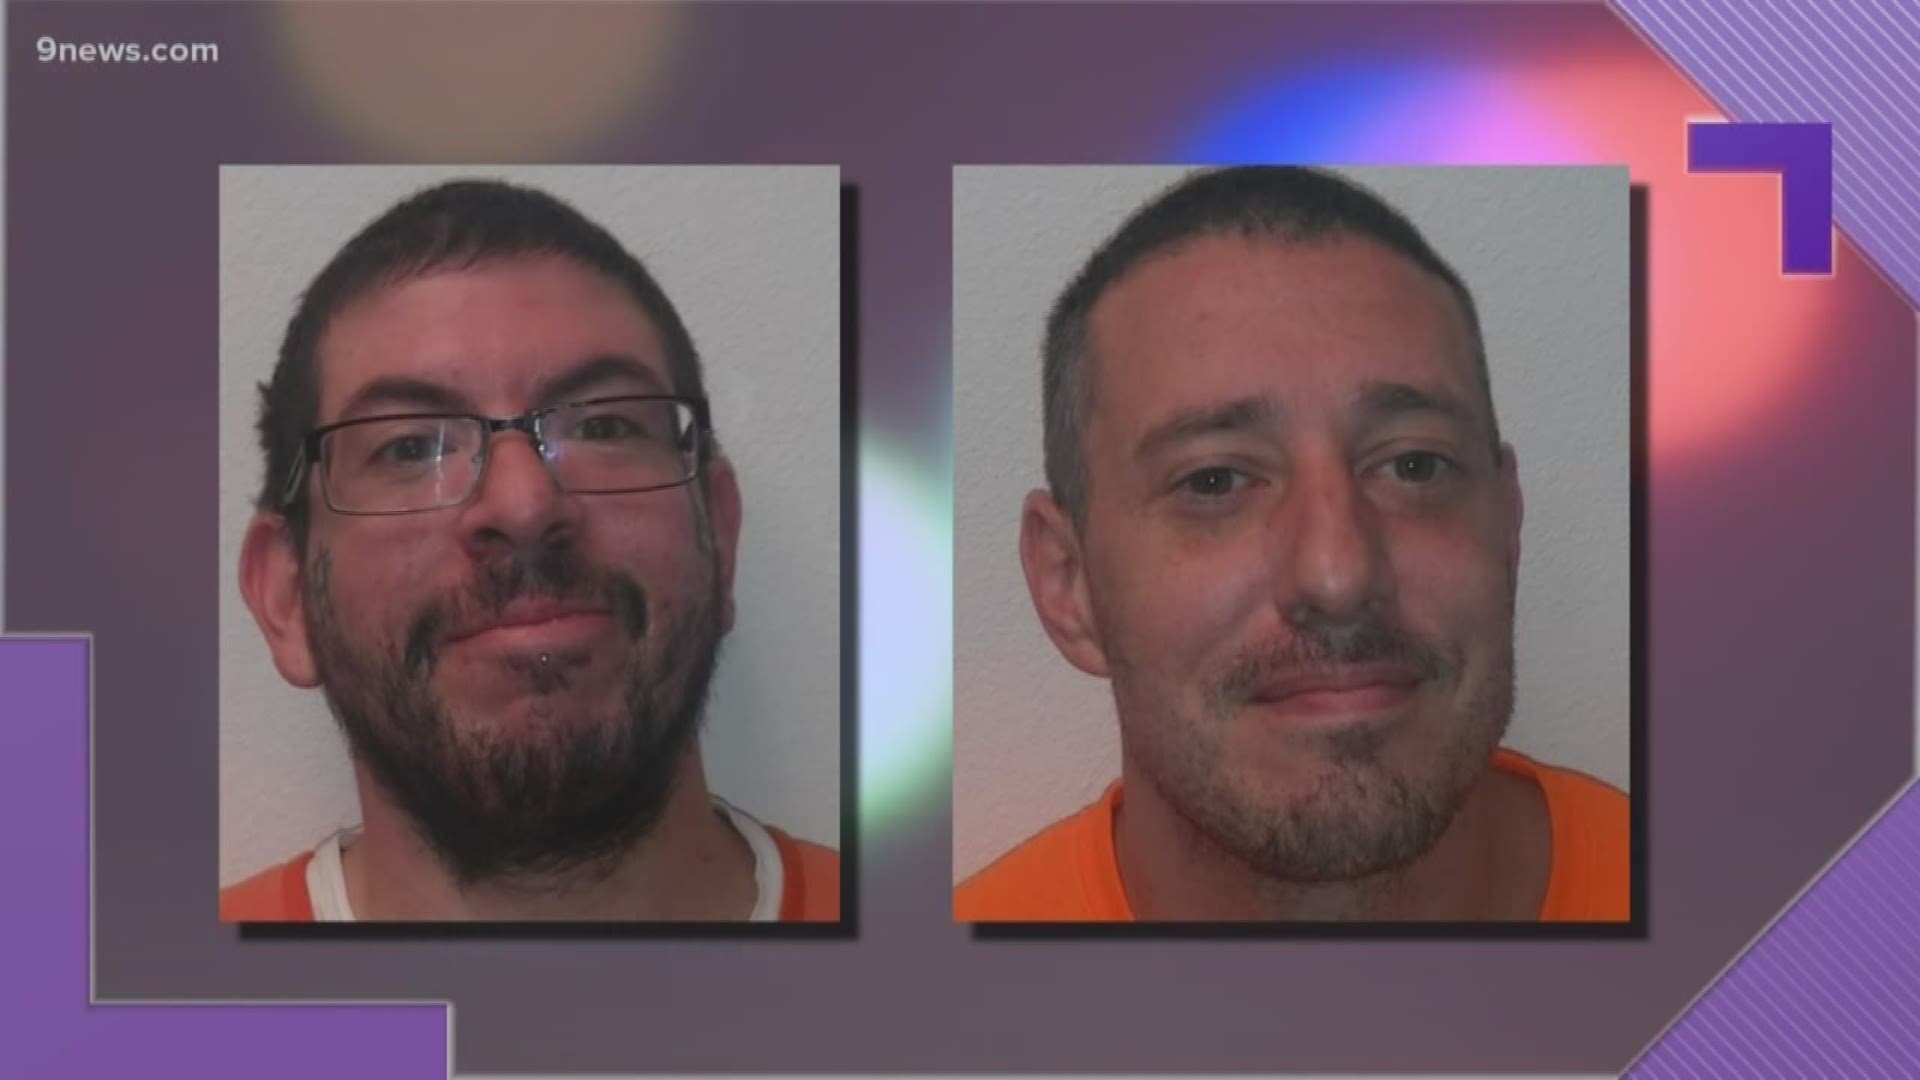 They overpowered the deputy around 11 p.m Sunday, stole a car from the facility and left the area, according to the Custer County Sheriff's Office.